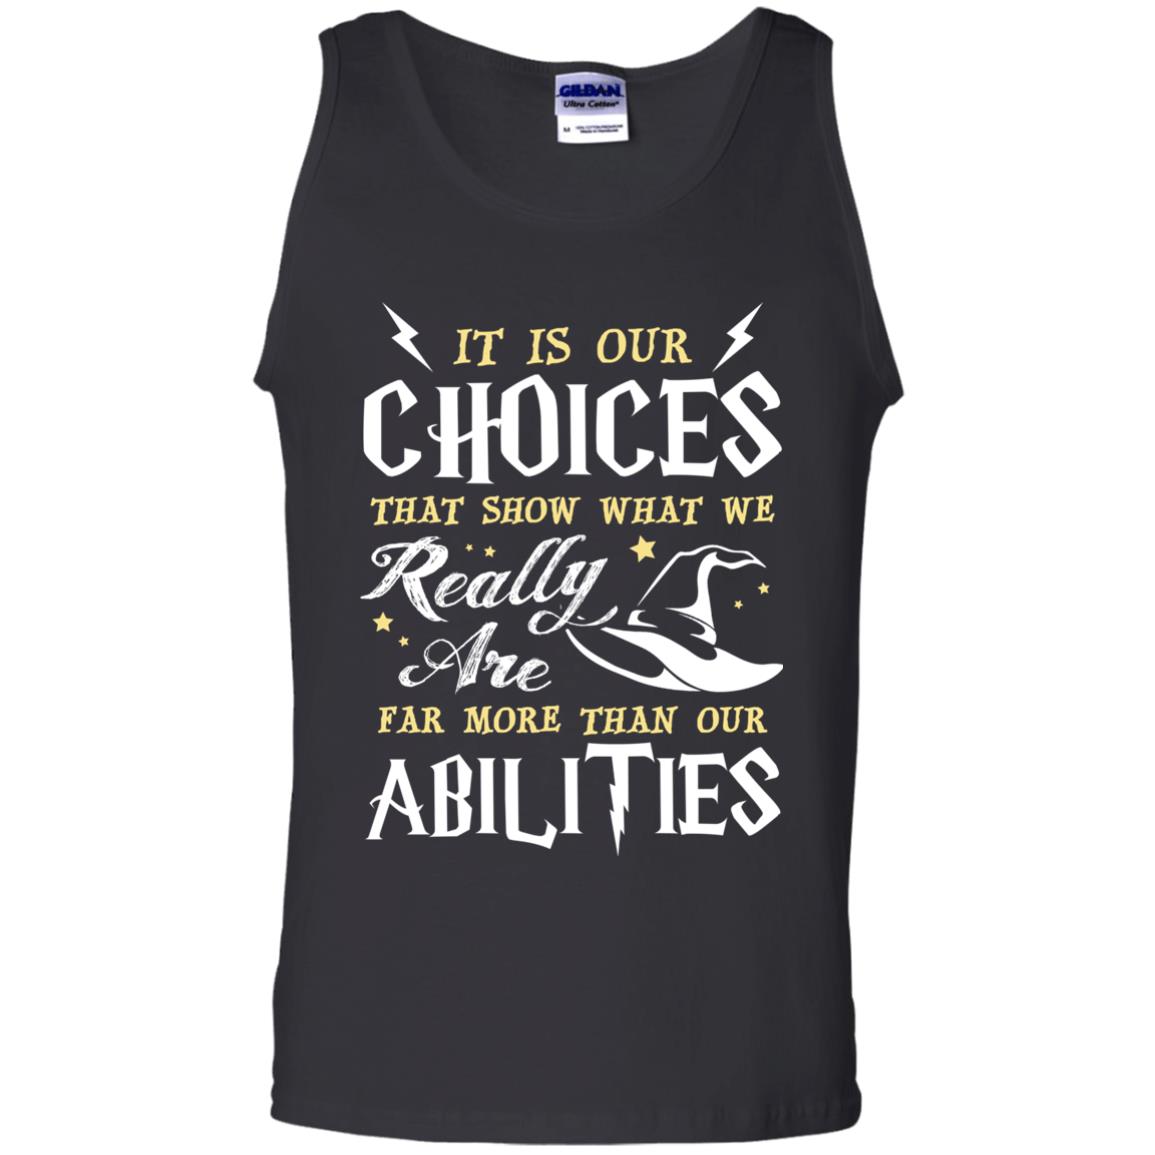 It Is Our Choices That Show What We Really Are Far More Than Our Abilities Harry Potter Fan T-shirtG220 Gildan 100% Cotton Tank Top